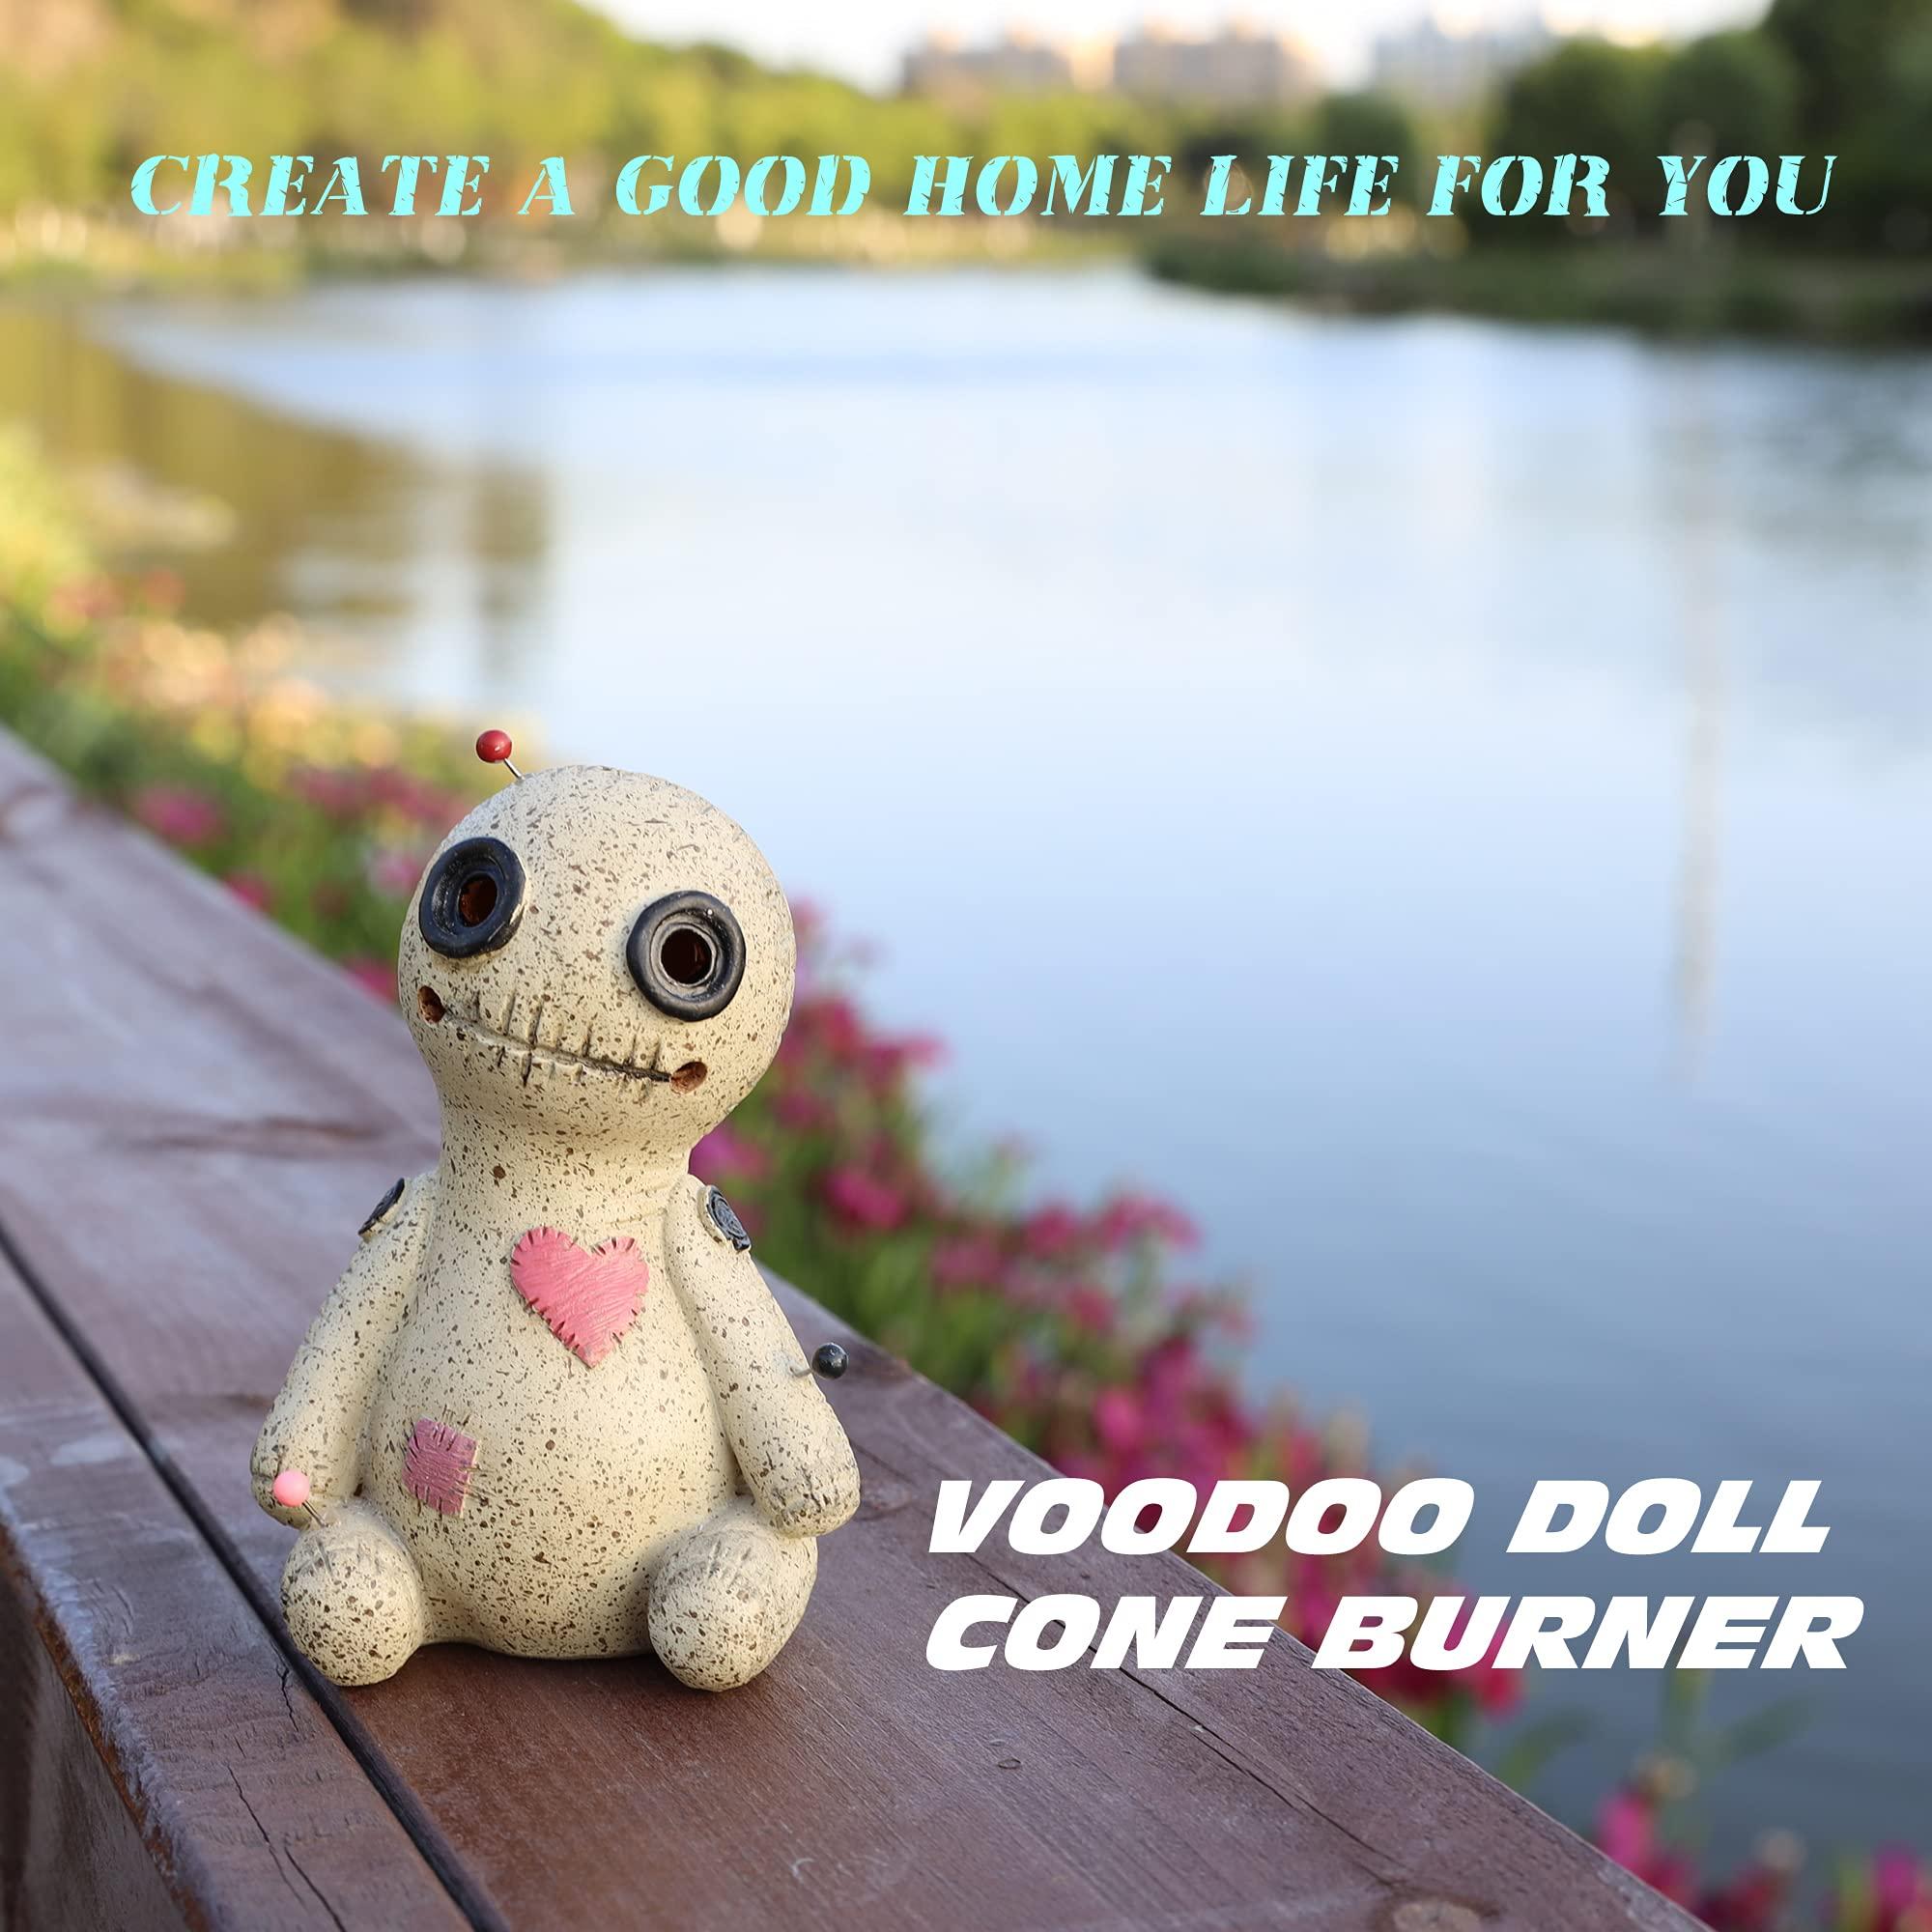 Voodoo Doll Cone Burner, Smoke Coming Out of The Eyes and Corners of The Mouth, Voodoo Doll Incense Burner Desktop Resin Ornament for Yoga Room, Ornament Handmade Craft for Home Decoration(Right) 4